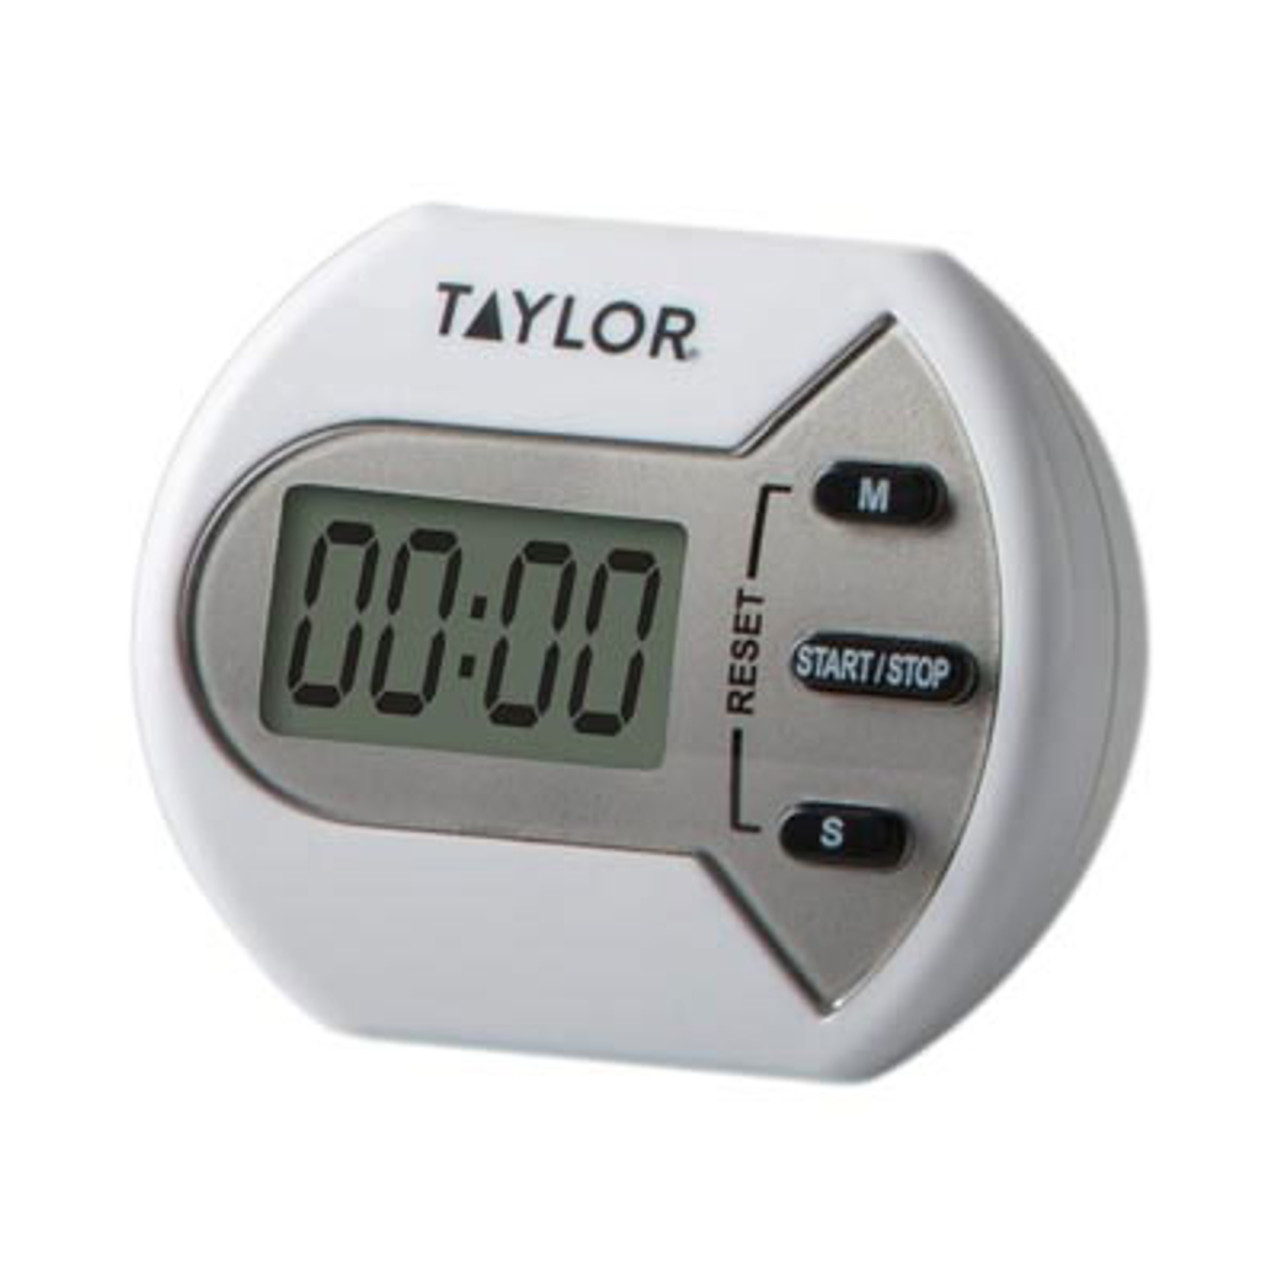  Taylor Kitchen Clip Timer with Magnet for Refrigerator